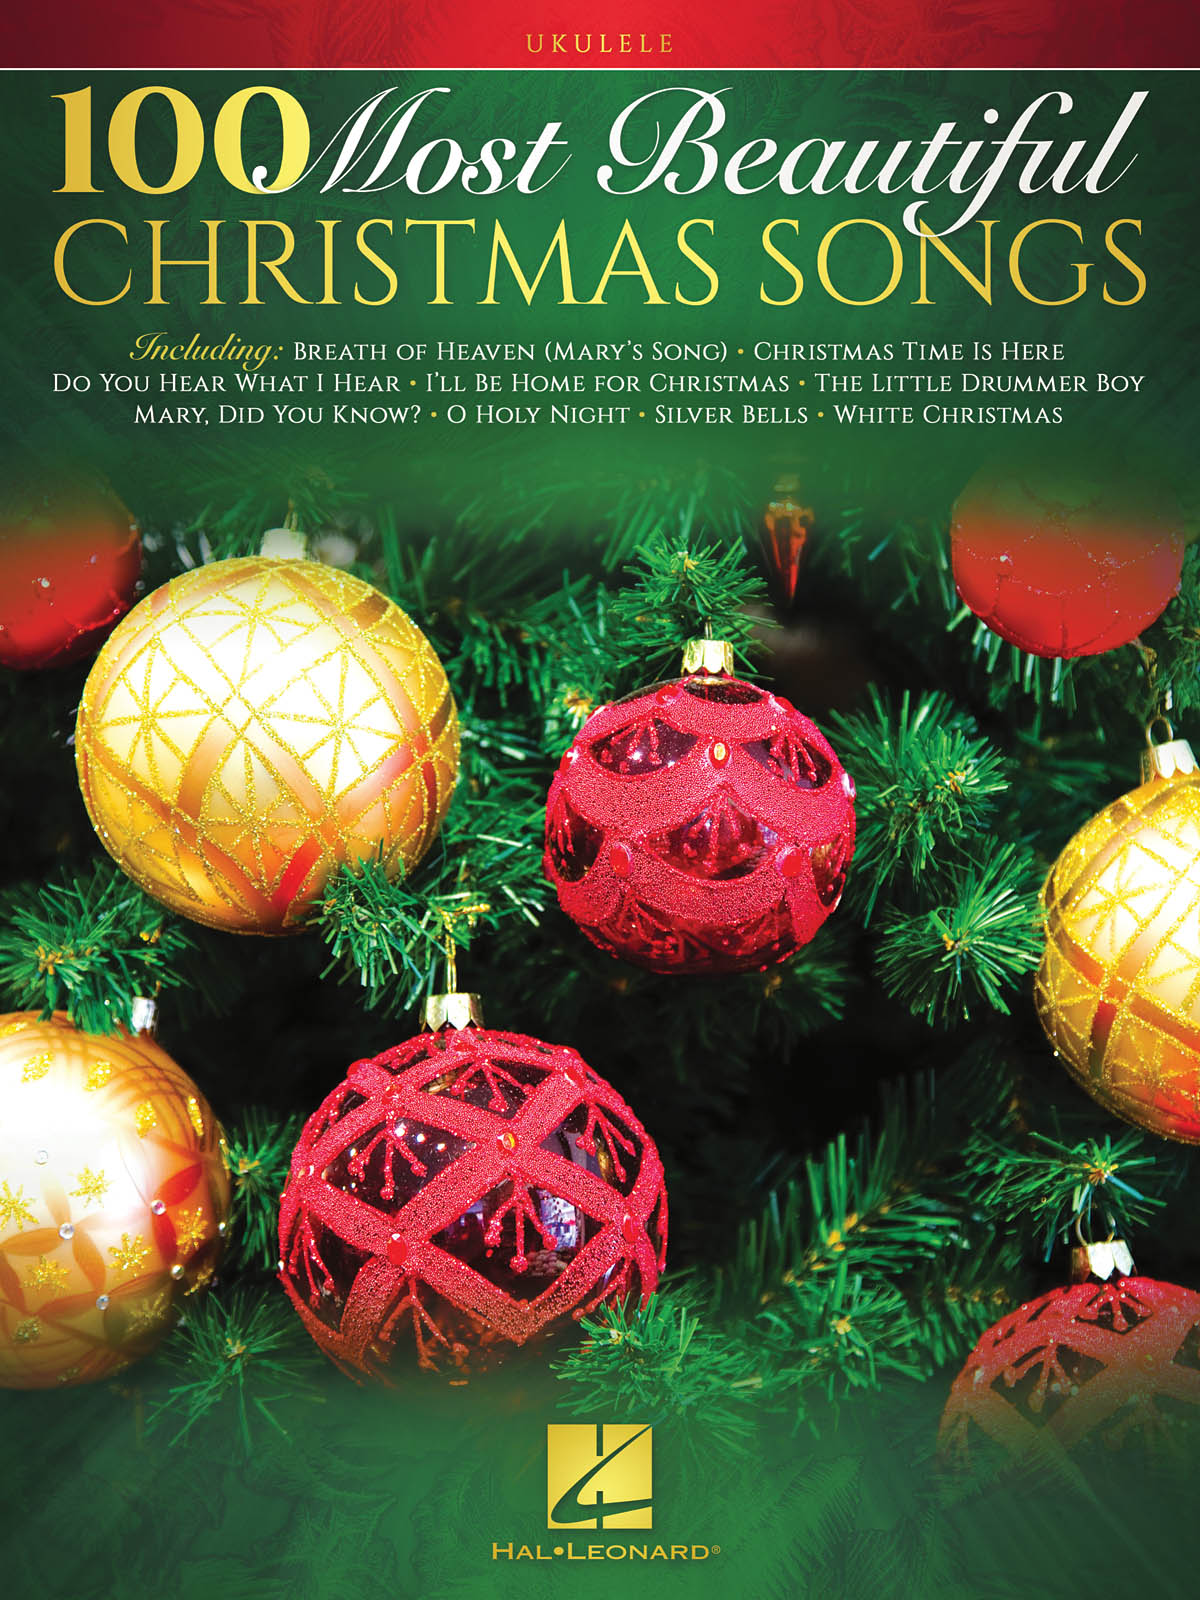 Image 1 of 100 Most Beautiful Christmas Songs - SKU# 49-295231 : Product Type Media : Elderly Instruments